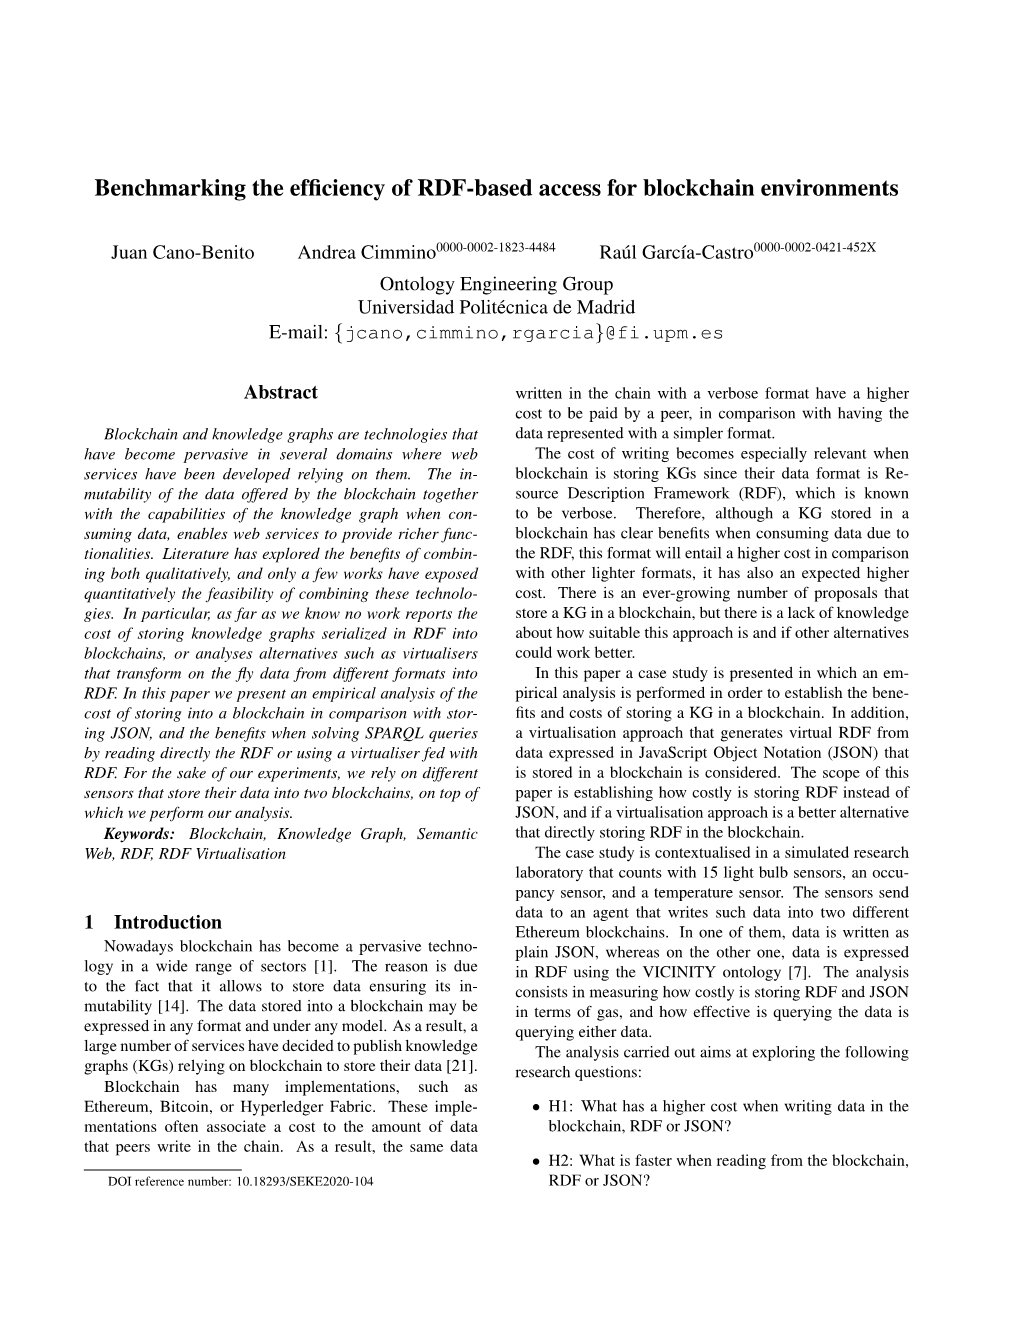 Benchmarking the Efficiency of RDF-Based Access for Blockchain